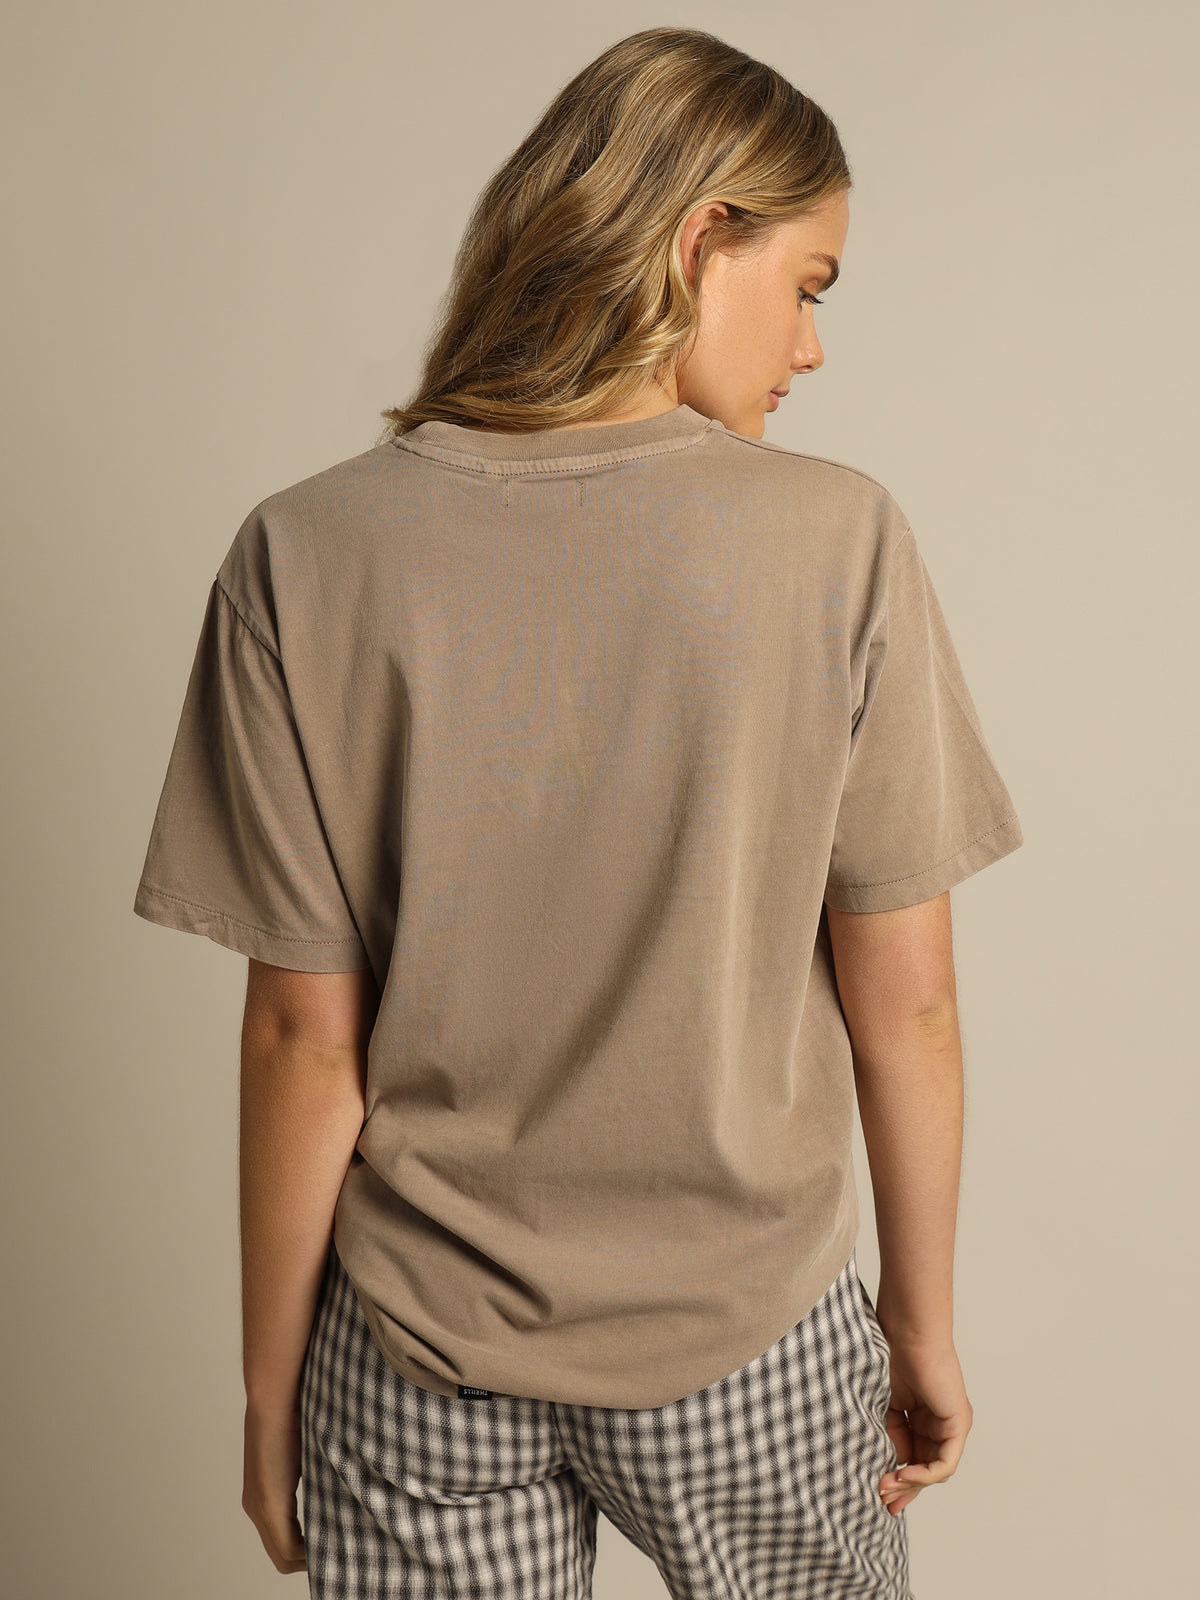 Company Alignment Merch Fit T-Shirt in Aged Tan